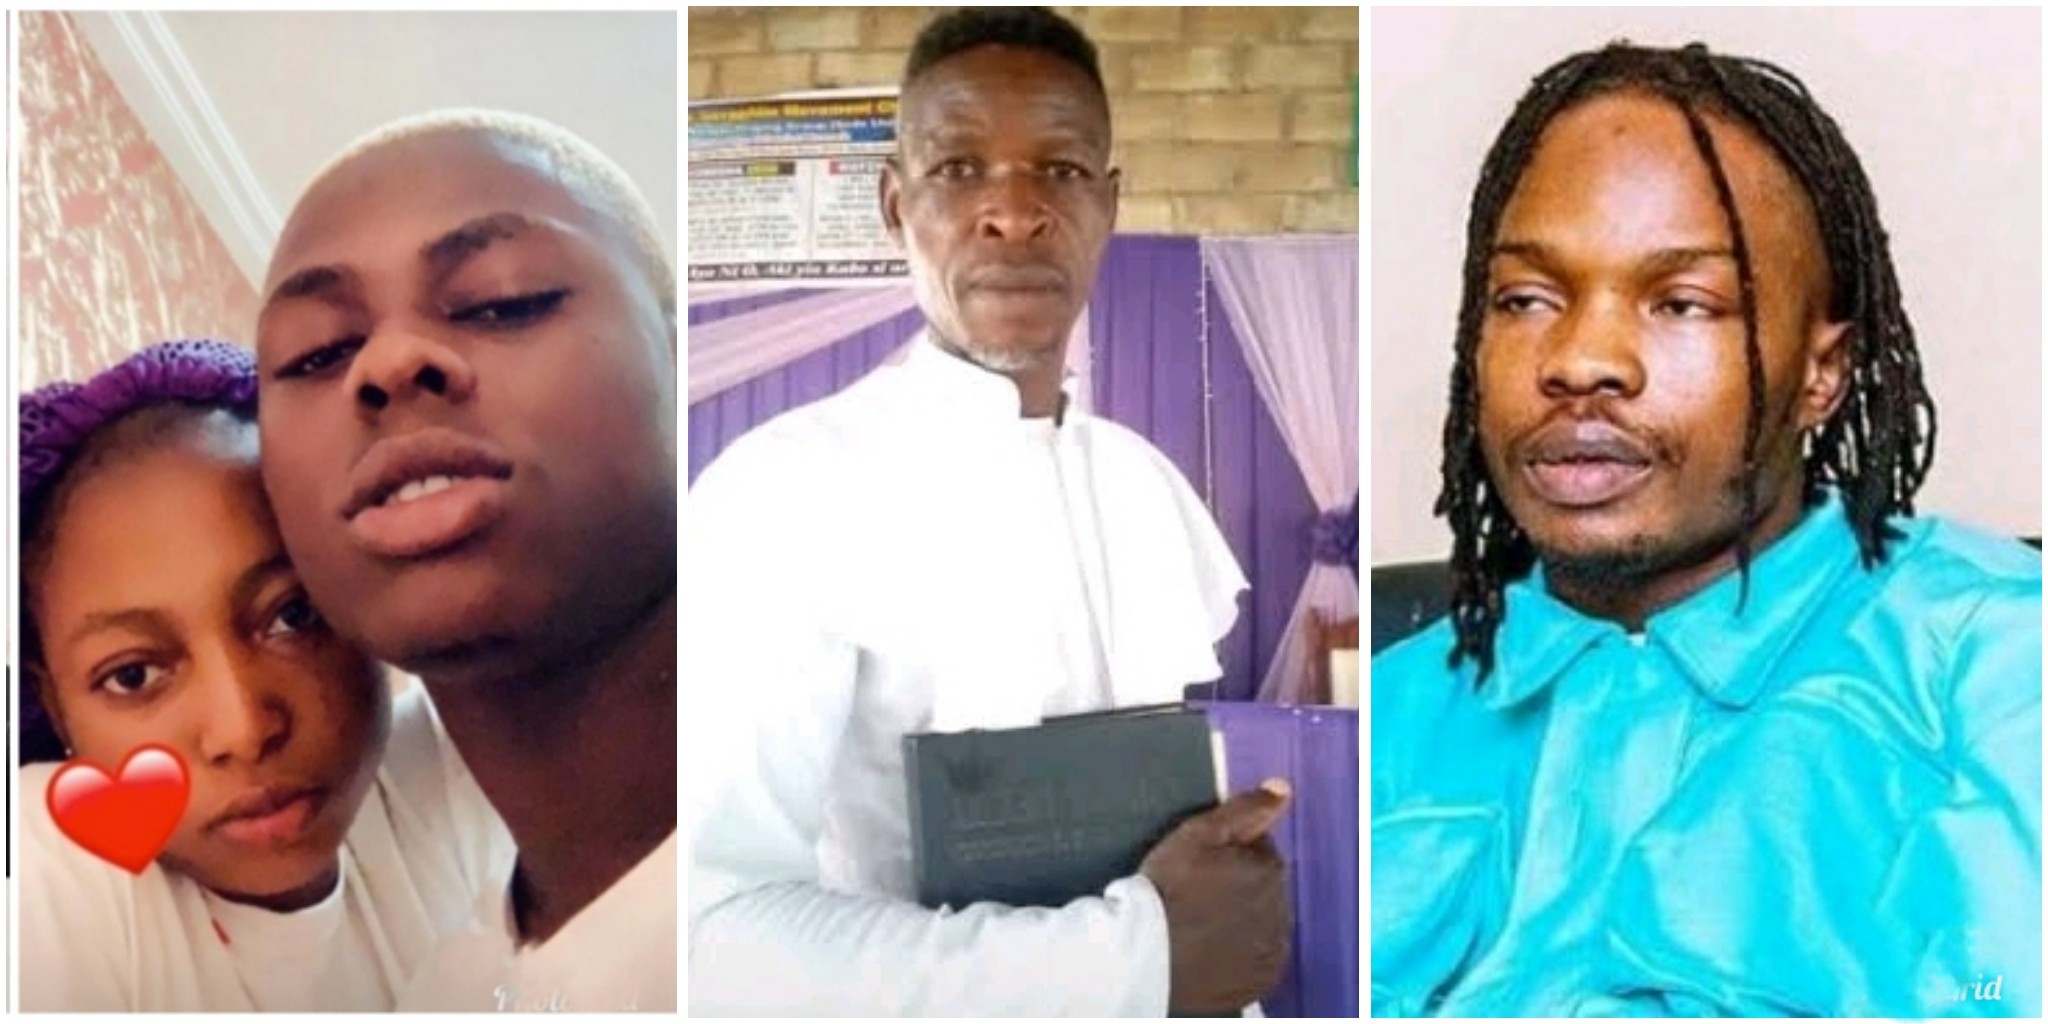 How Mohbad met his wife at Naira Marley’s record label – Late Singer’s Dad opens up